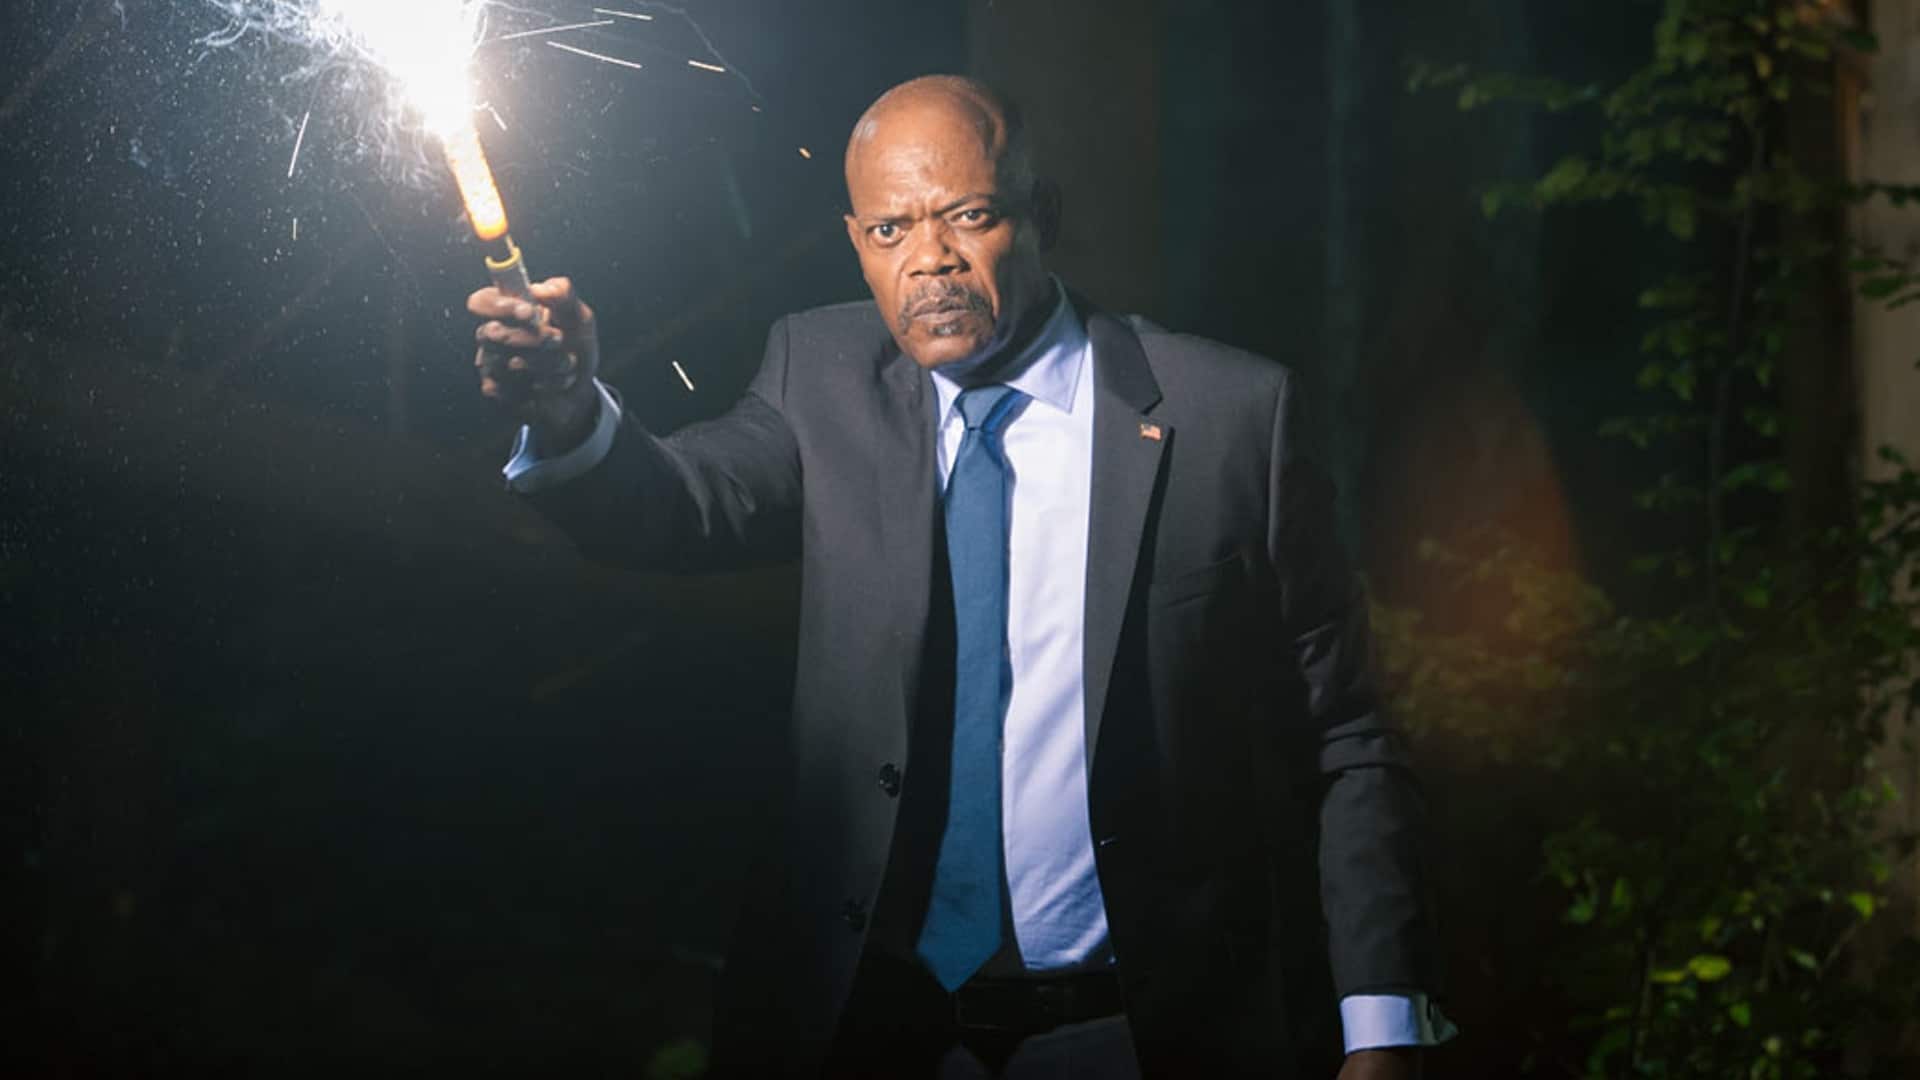 Samuel L. Jackson to Star in The Last Days of Ptolemy Grey For AppleTV+